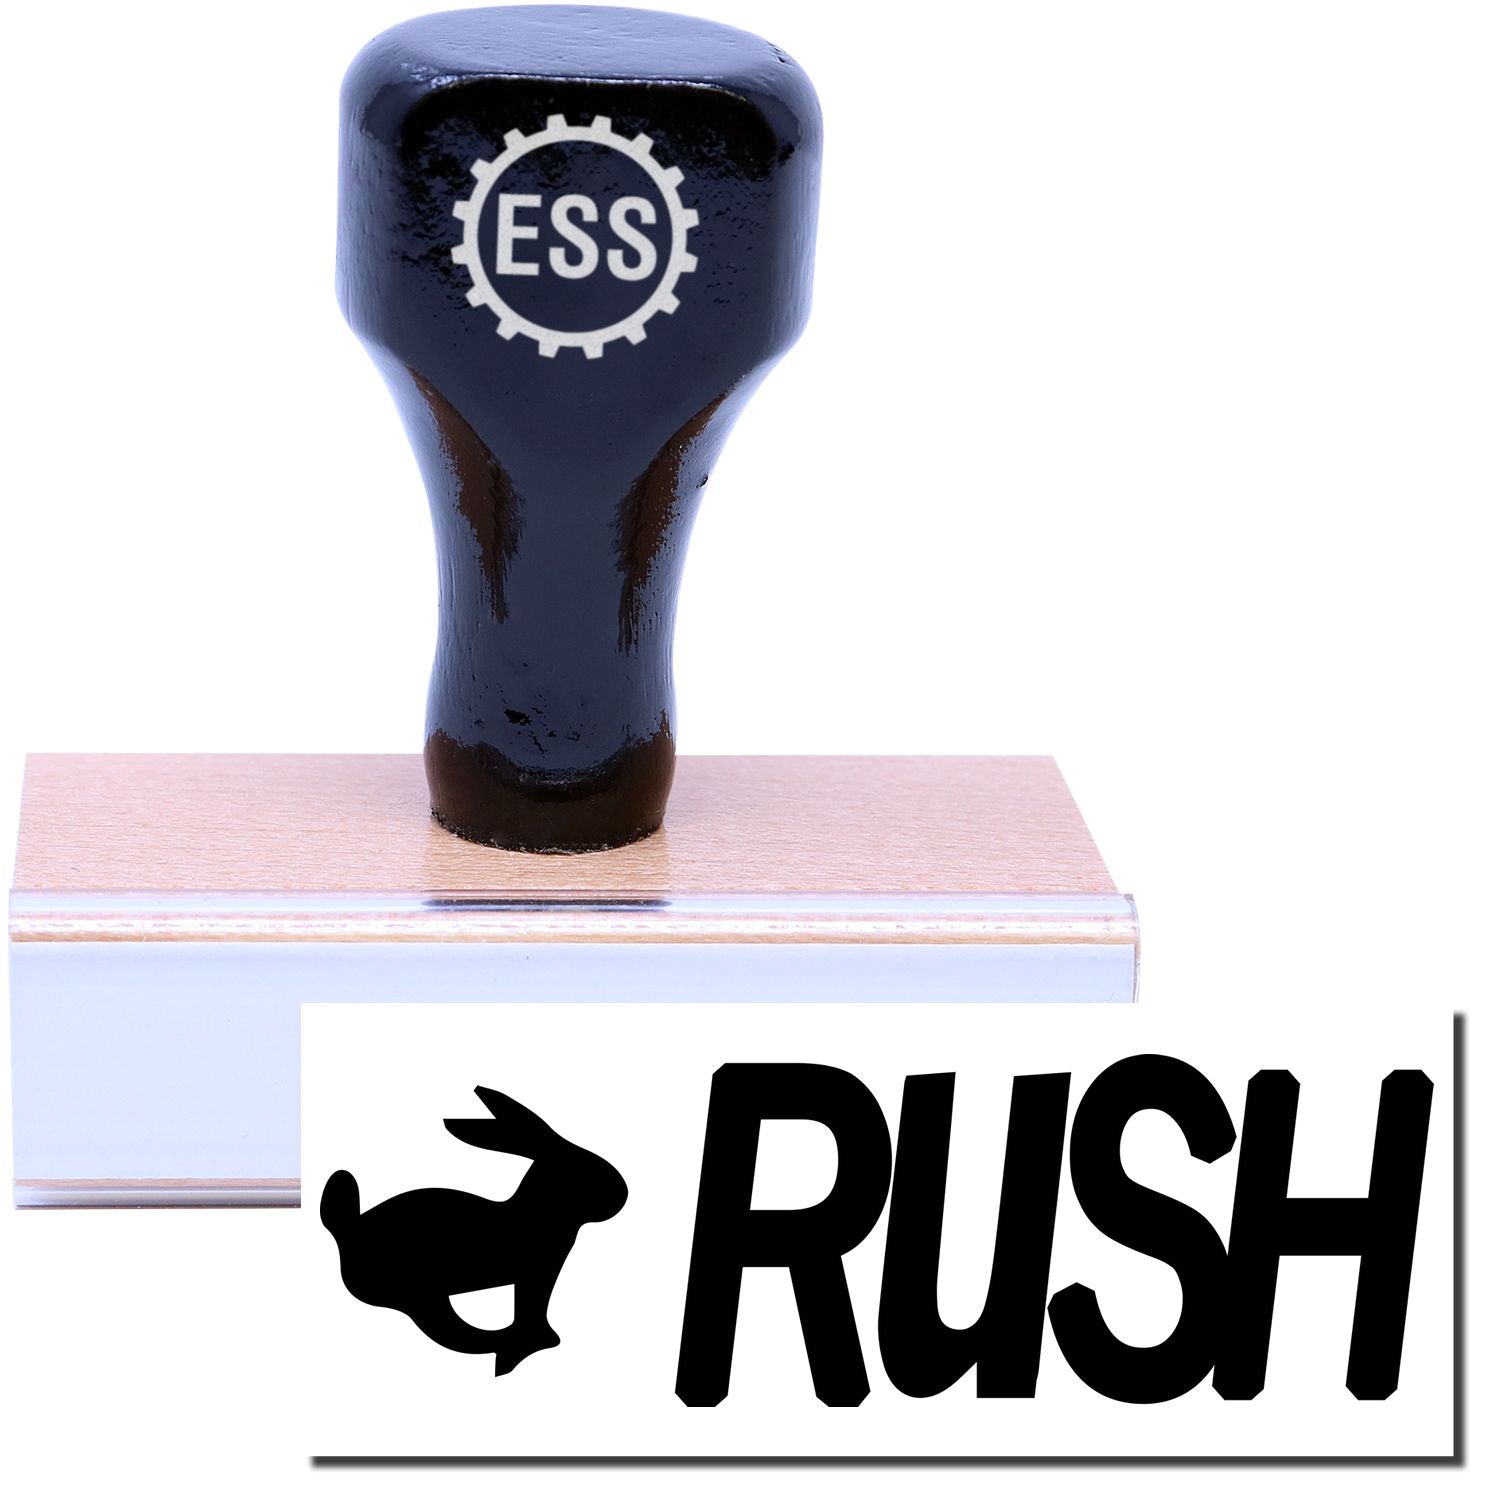 A stock office rubber stamp with a stamped image showing how the text "RUSH" in a large bold font with an image of a rabbit on the left side is displayed after stamping.